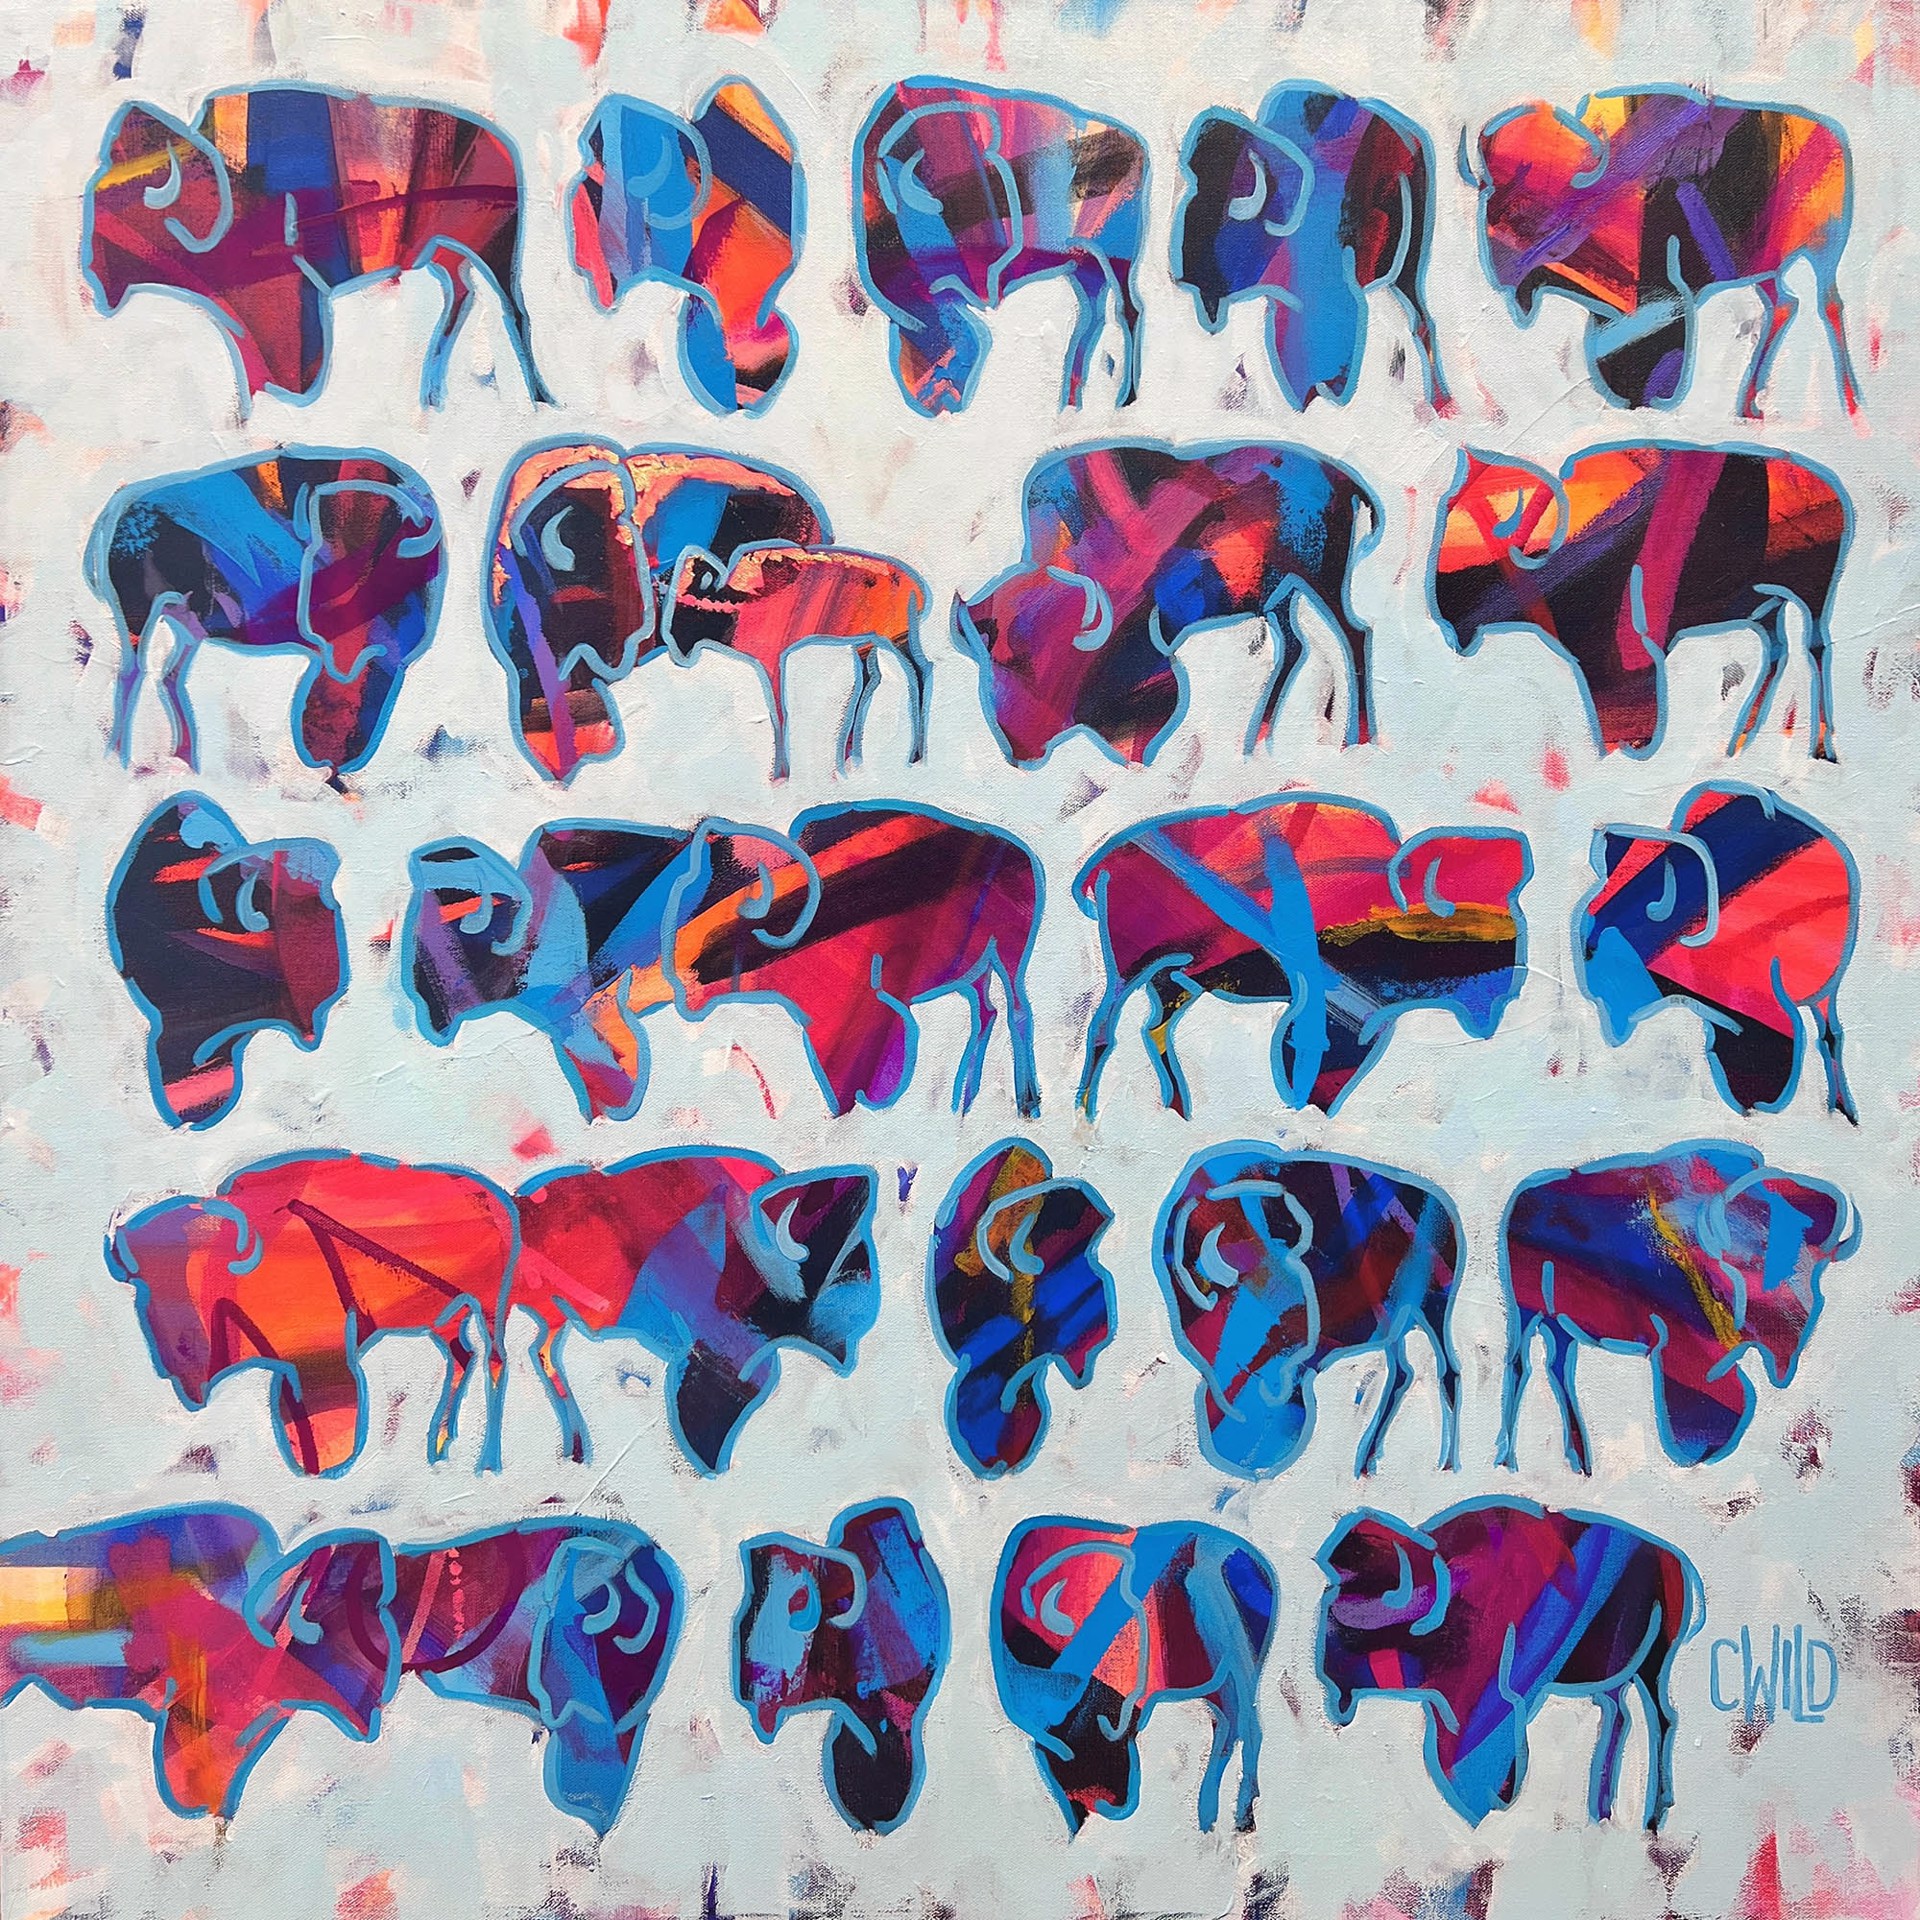 Original Painting Featuring Colorful Bison Silhouettes Over Abstracted Blue Background